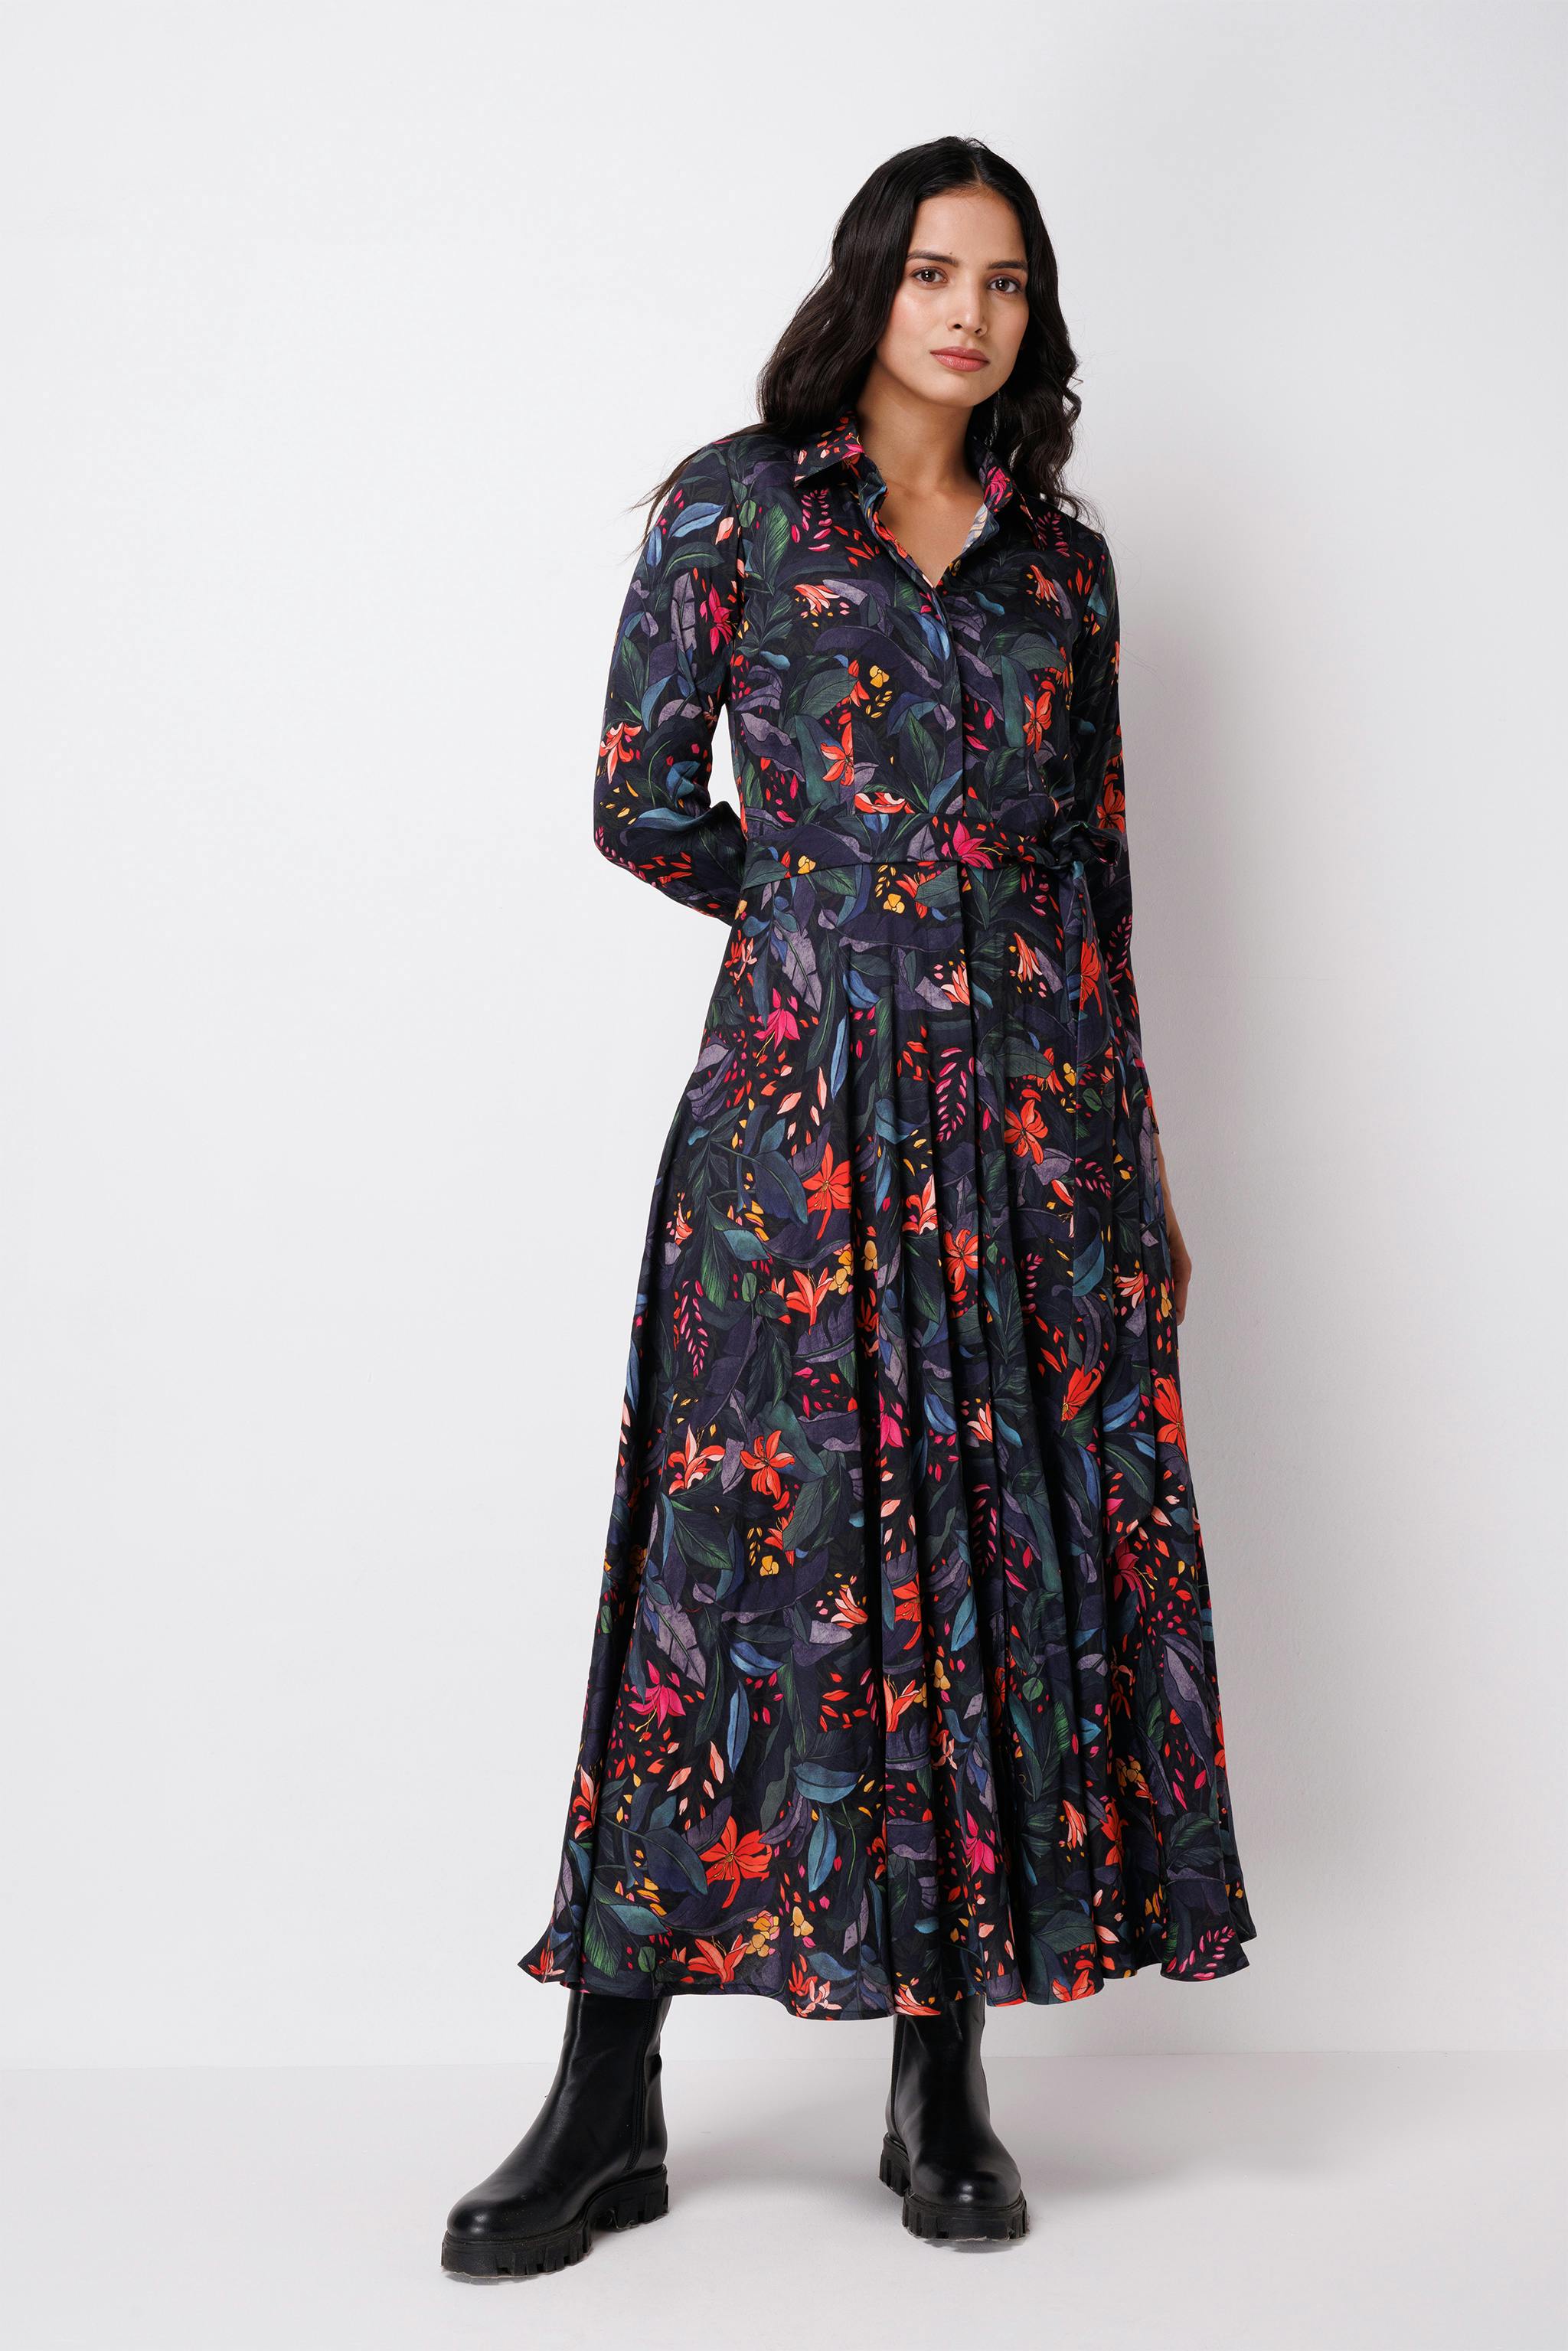 Forest Print Full Length Dress, a product by House of Sangai